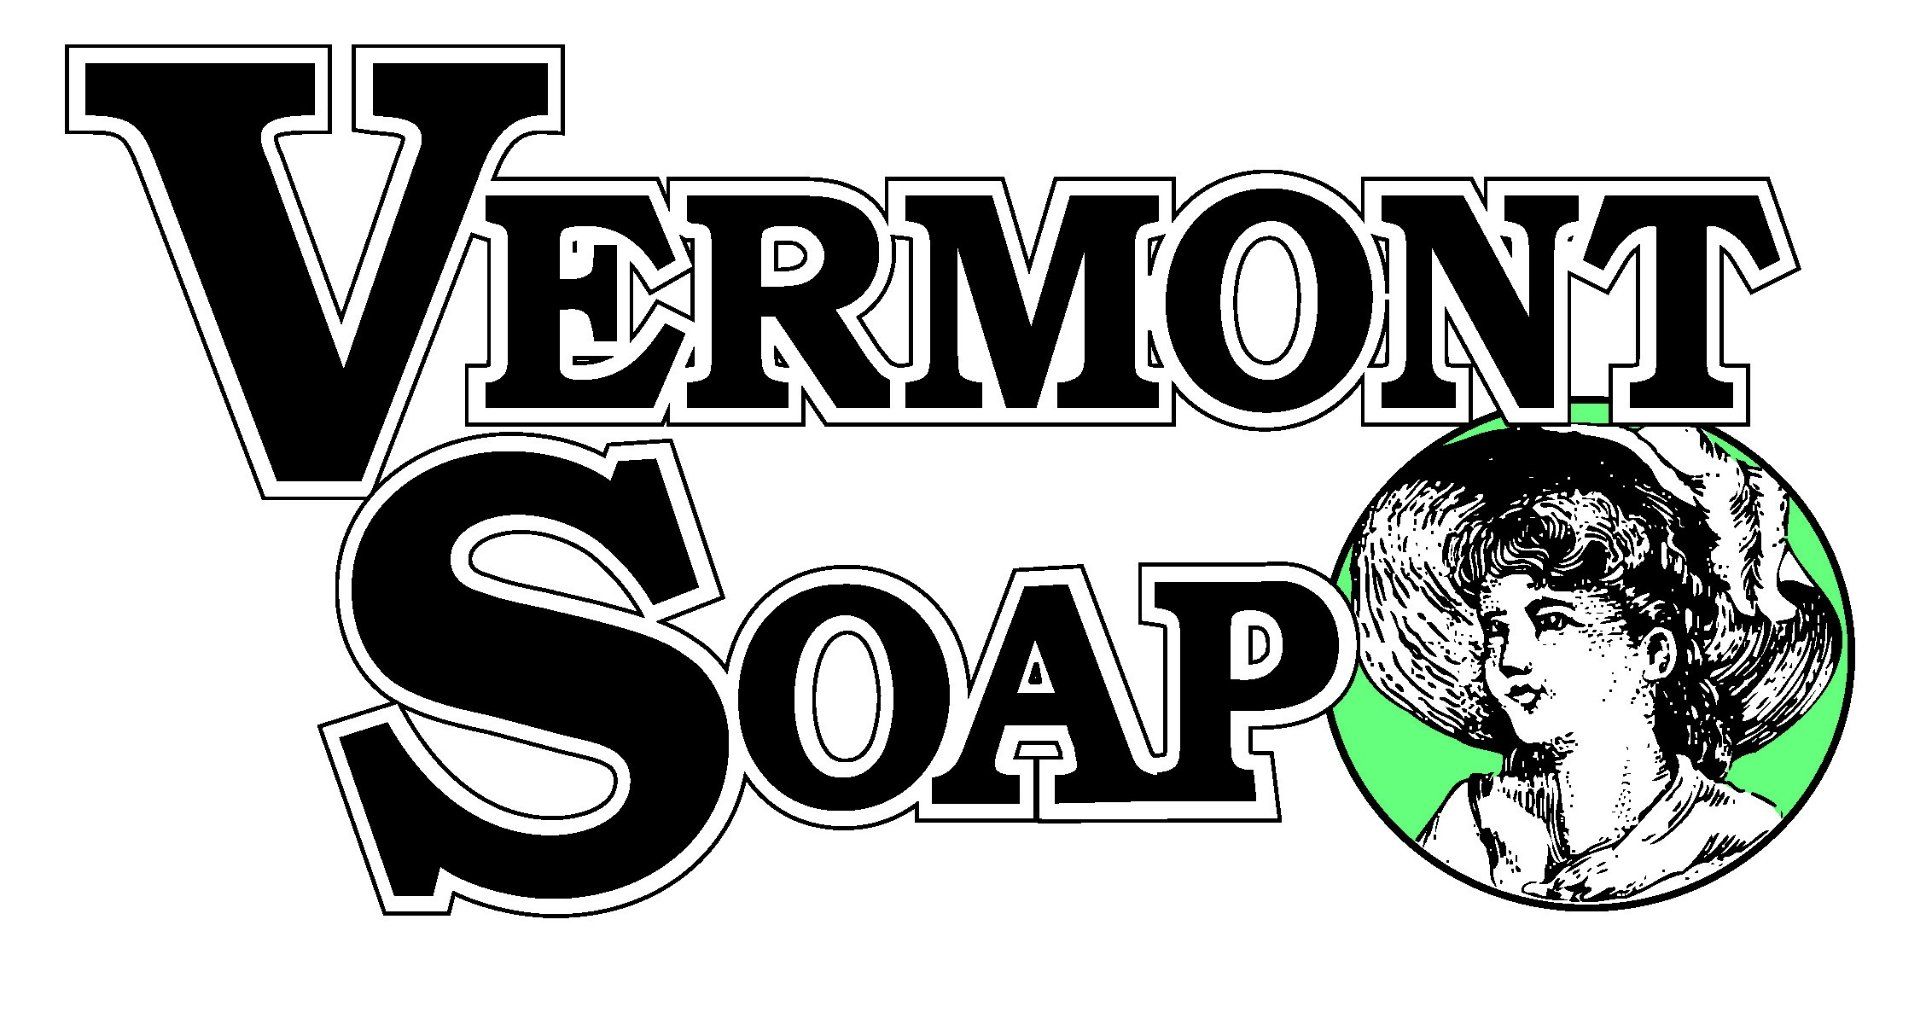 Vermont Soap Old Logo